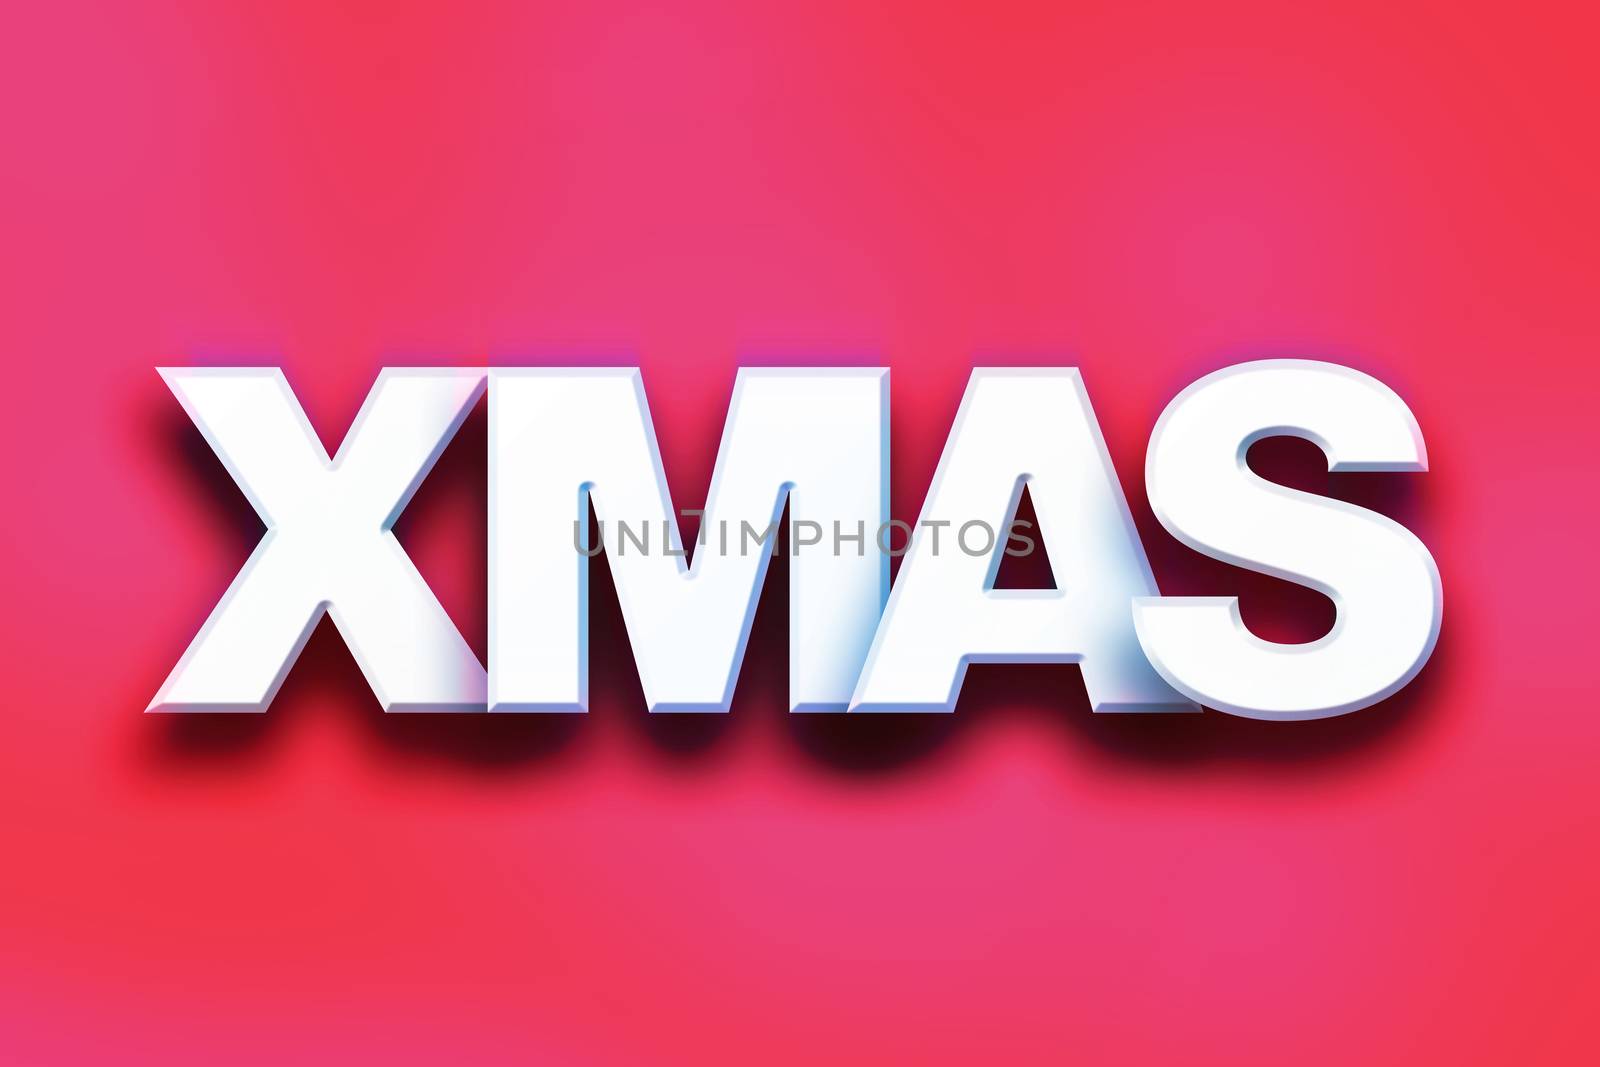 The word "Xmas" written in white 3D letters on a colorful background concept and theme.